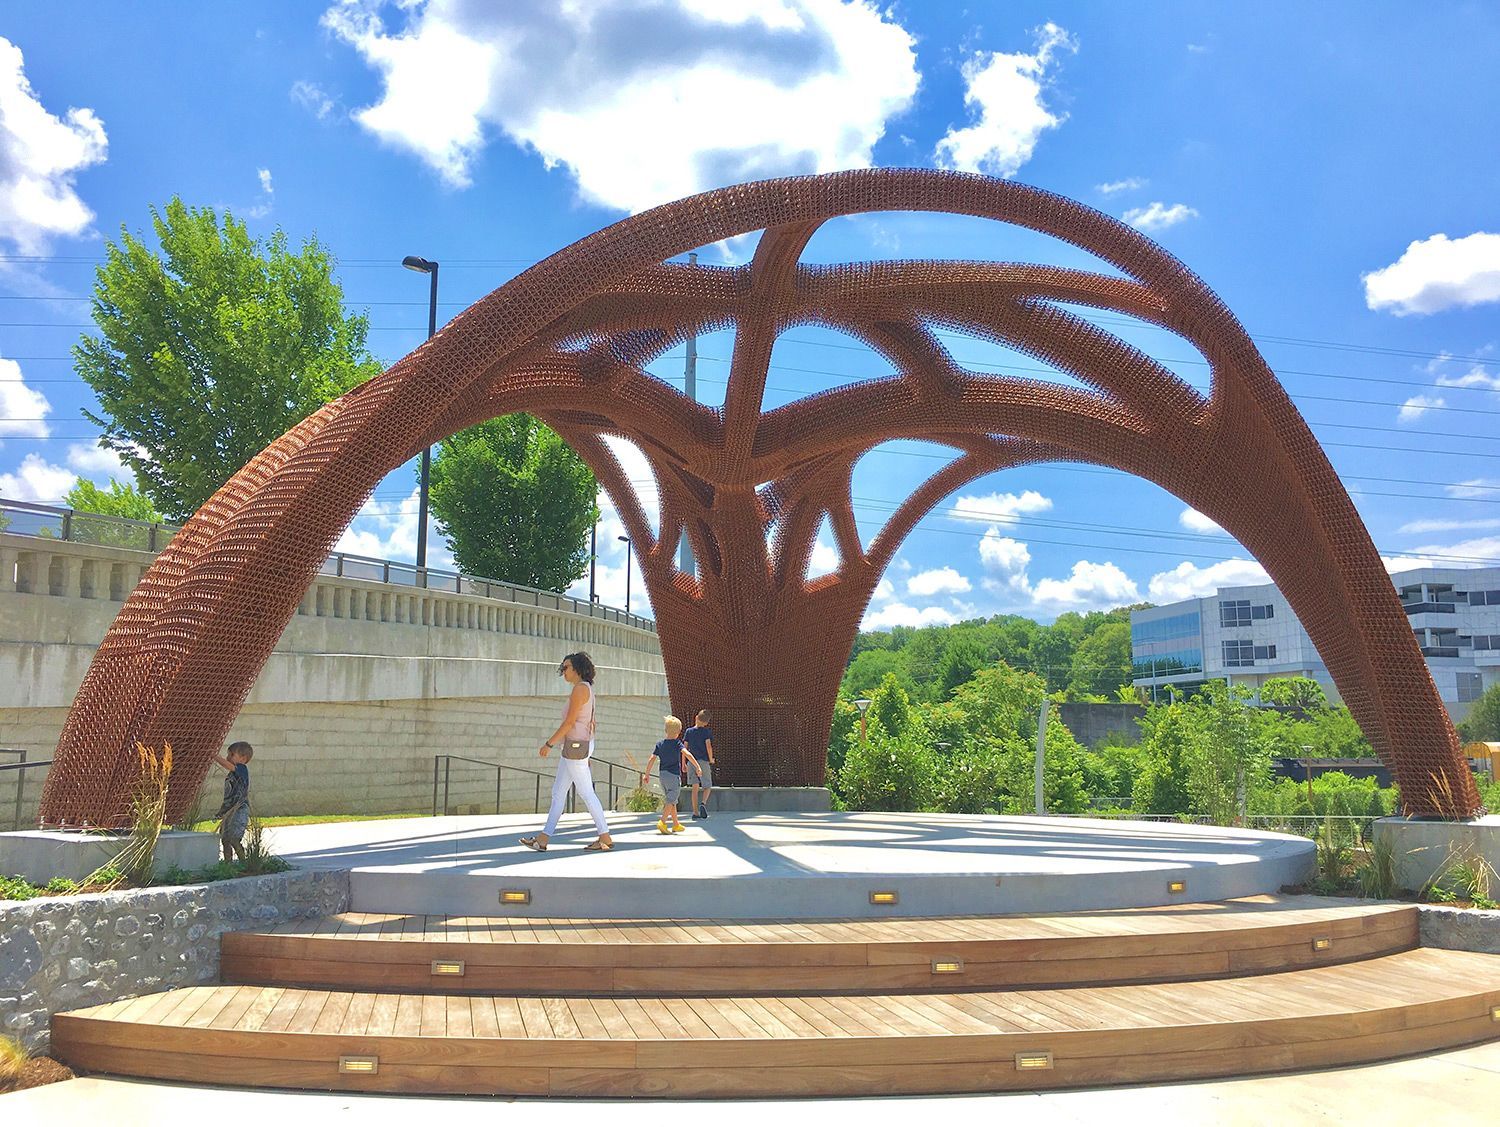 World's Largest 3D-Printed Structure: world record in Chattanooga, Tennessee